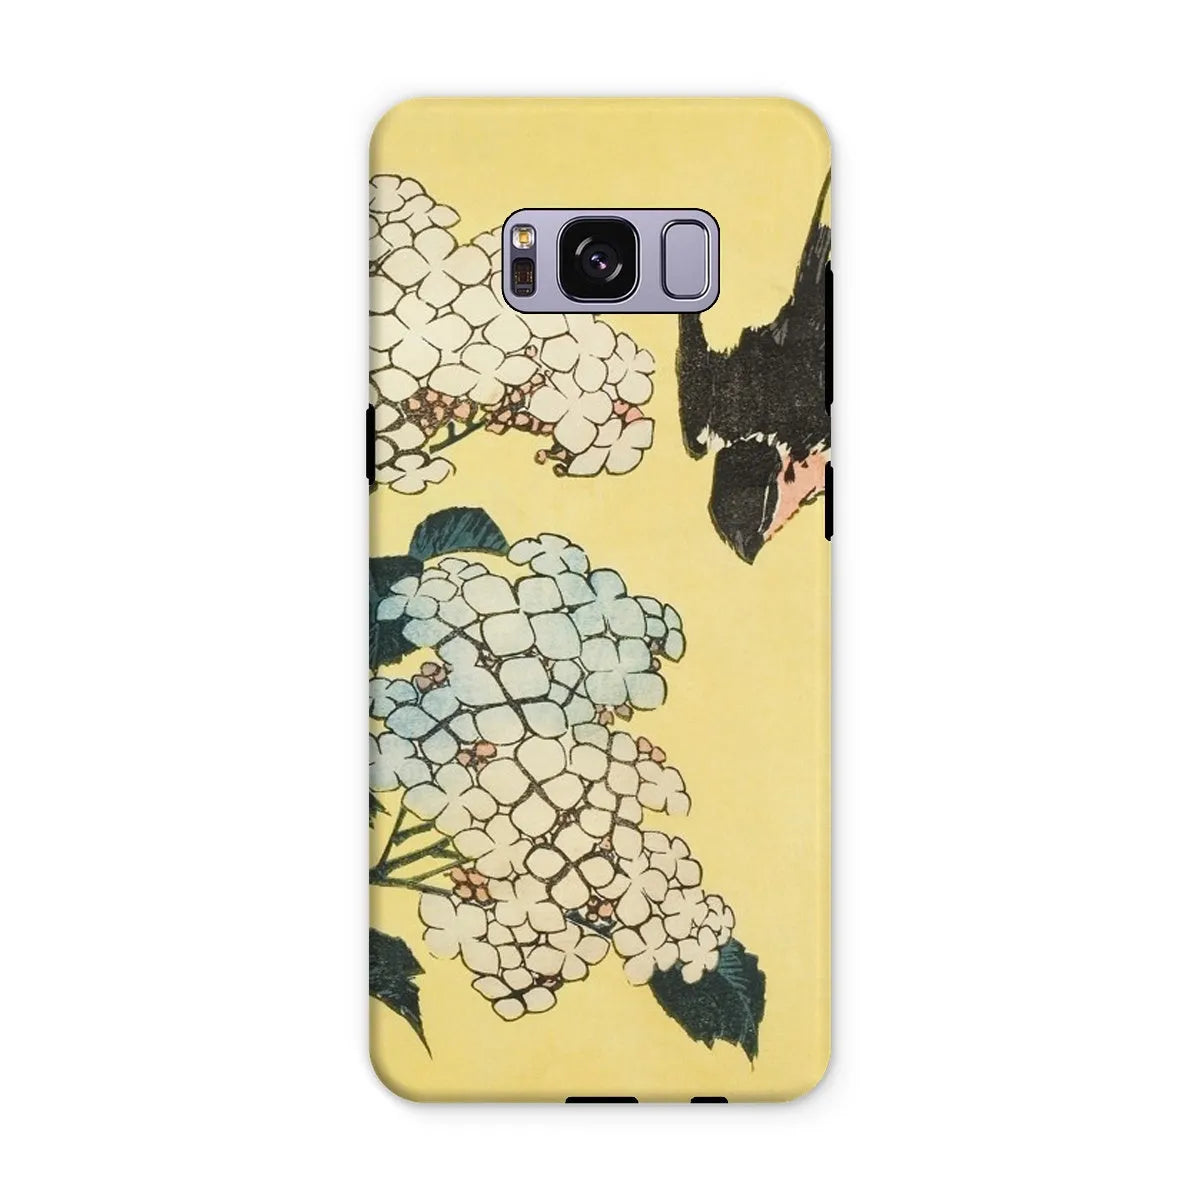 Hydrangea And Swallow - Japanese Art Phone Case - Hokusai - Samsung Galaxy S8 Plus / Matte - Mobile Phone Cases